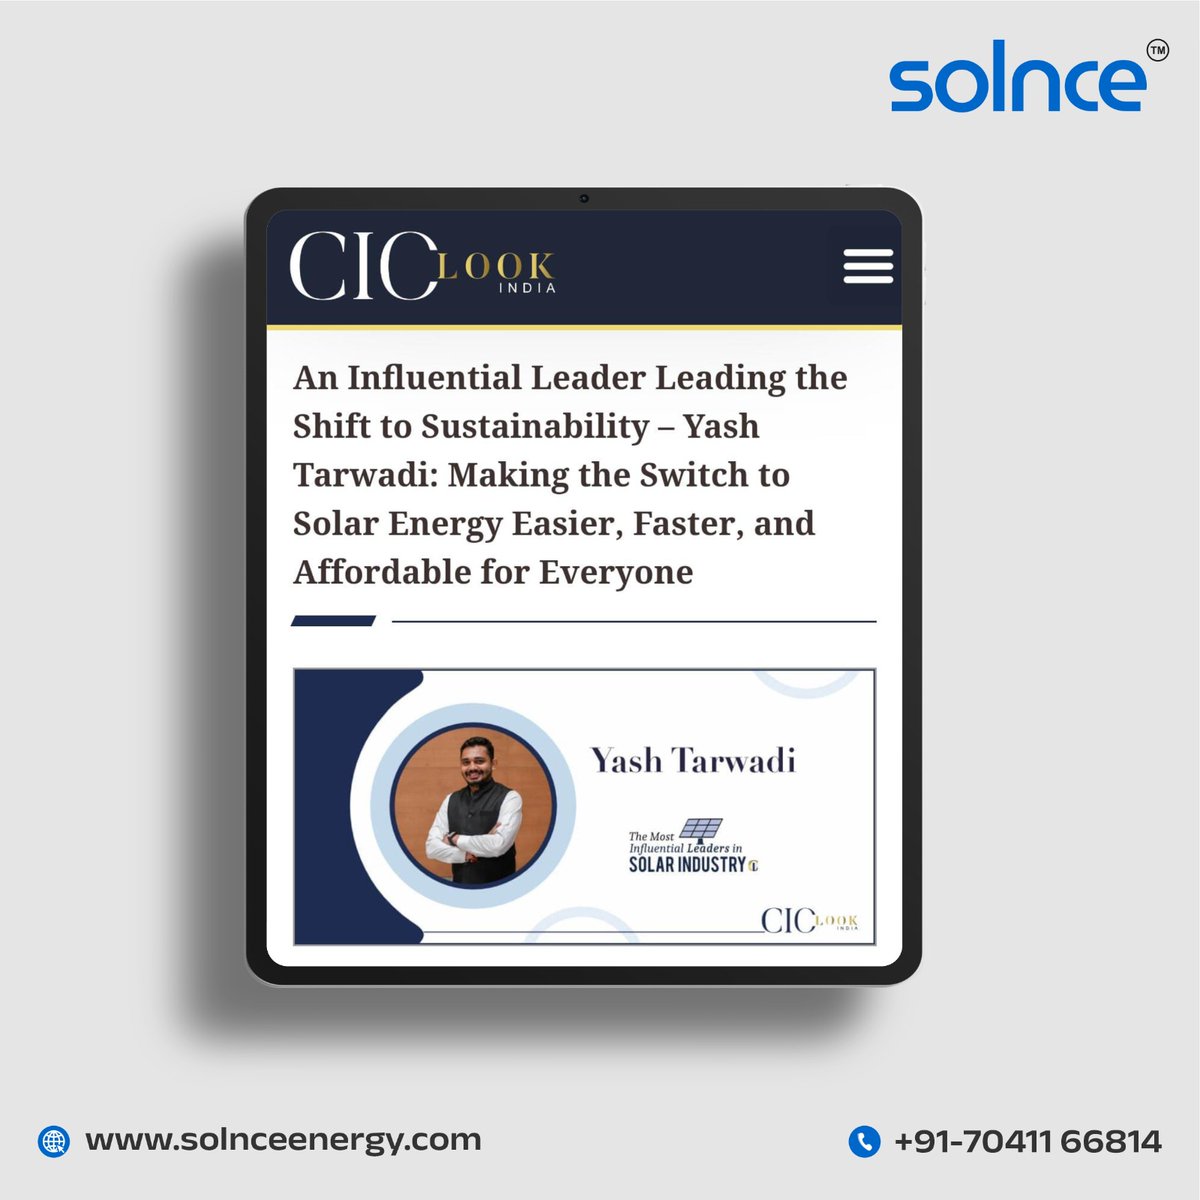 We are so pleased to inform that CIOLOOK INDIA have cover #Solnce story under The Most Influential Leaders in #Solar Industry 🤩 ciolookindia.com/an-influential… . #solarpower #solarpanel #news #newscoverage #subsidy #Gogreen #media #switchtosolar #solarsolutions #TTPD #PMSuryaGharYojana